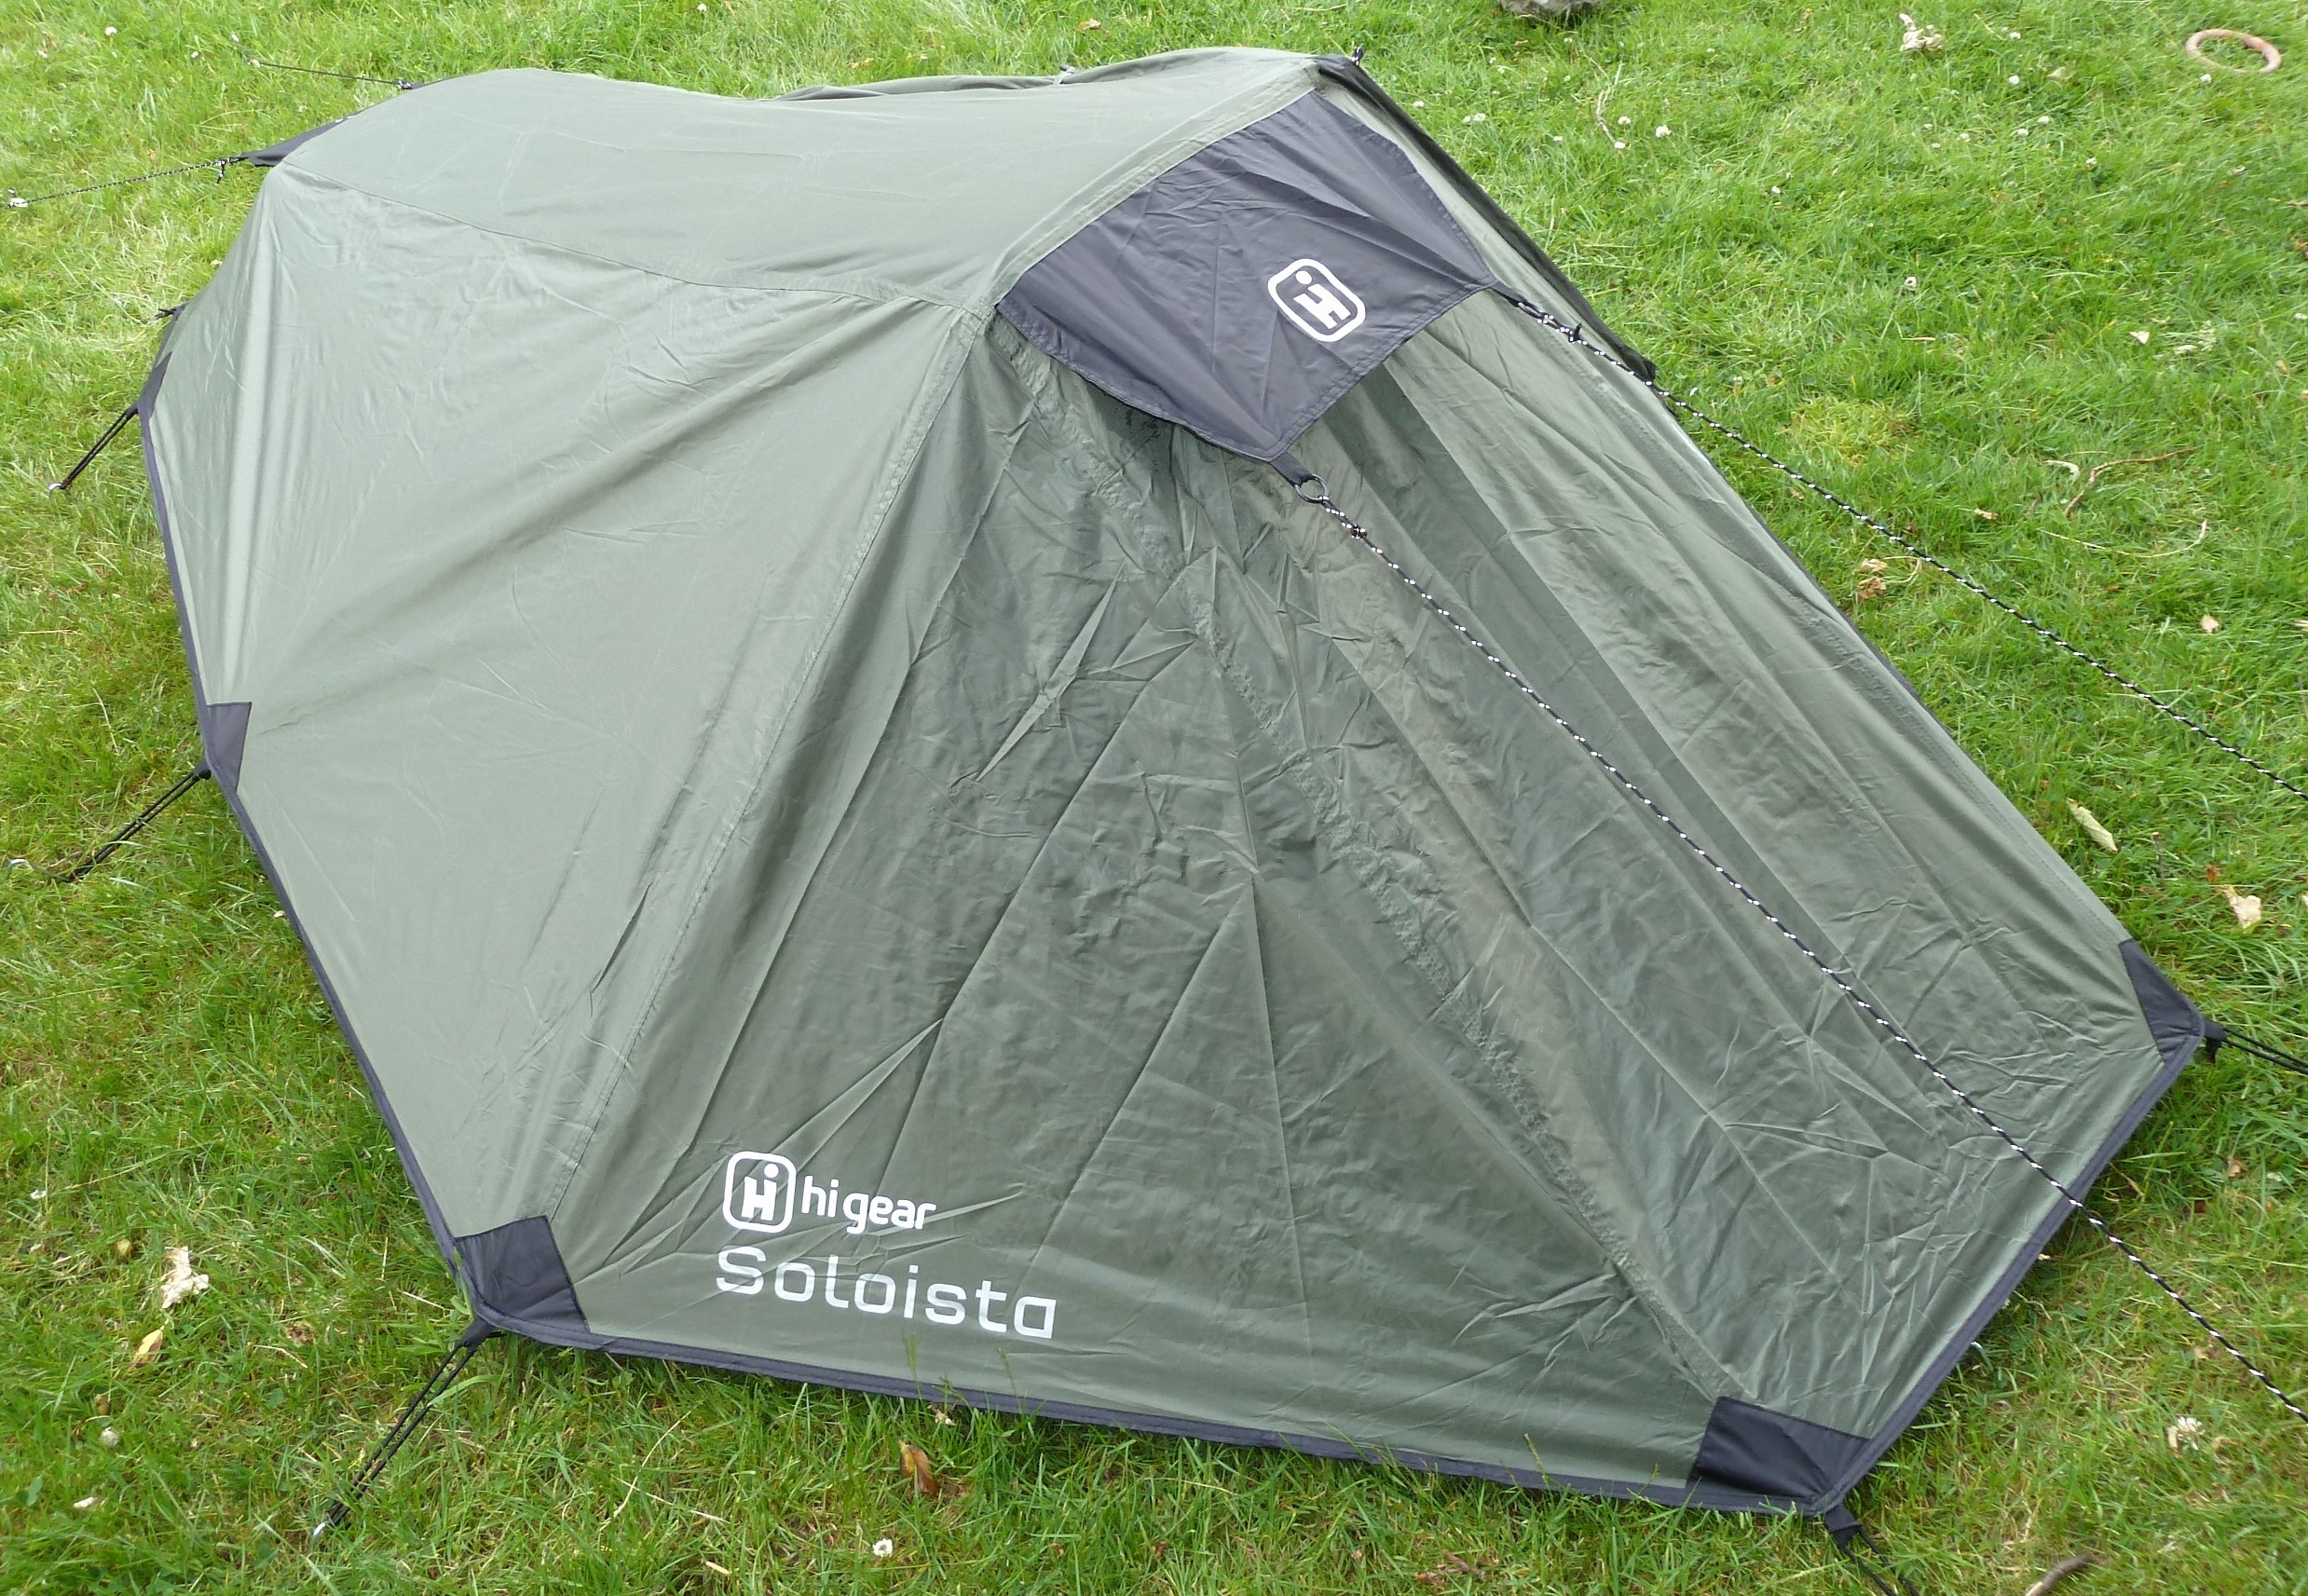 How to Make Name Tents Lovely Tent Review – Hi Gear soloista Backpacking Tent – Initial